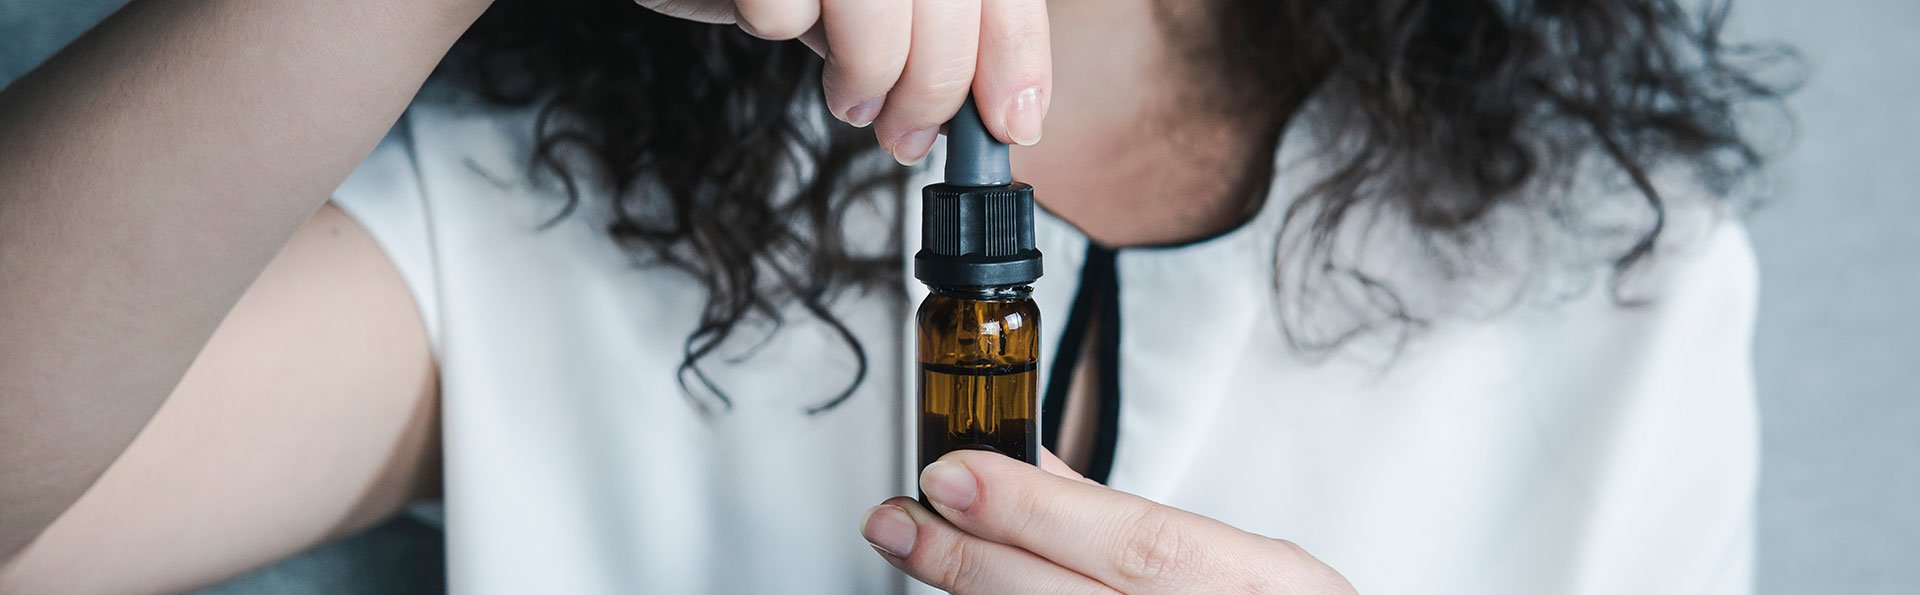 How To Choose a CBD Tincture?